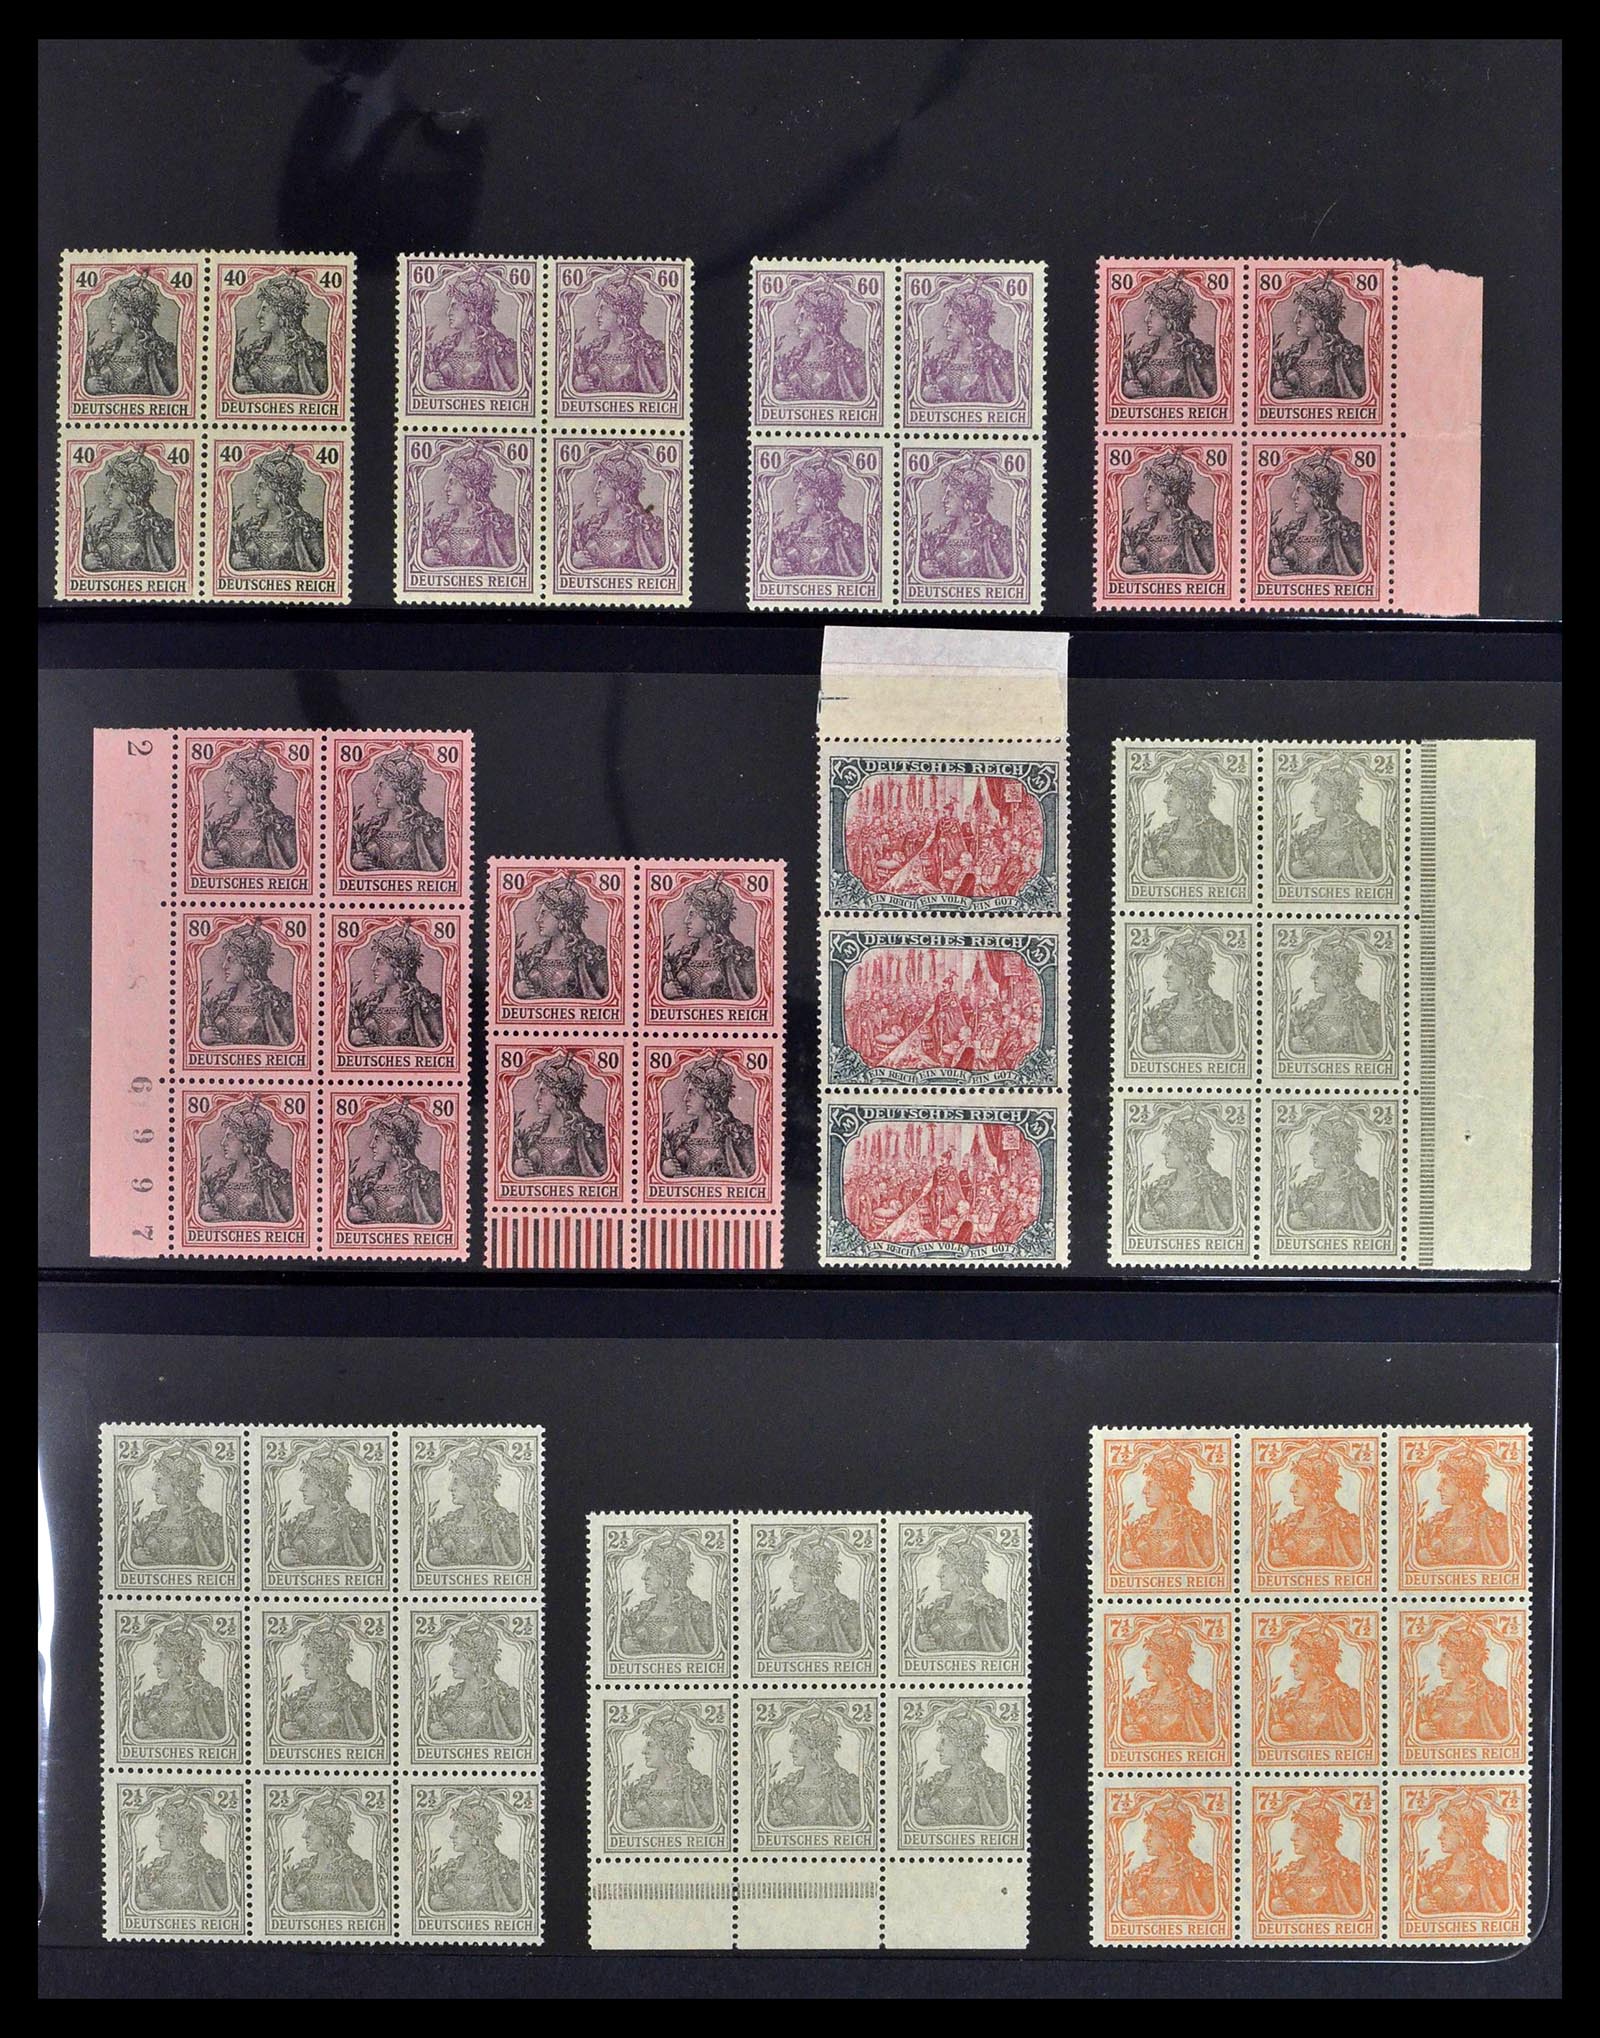 39255 0003 - Stamp collection 39255 German Reich MNH blocks of 4.